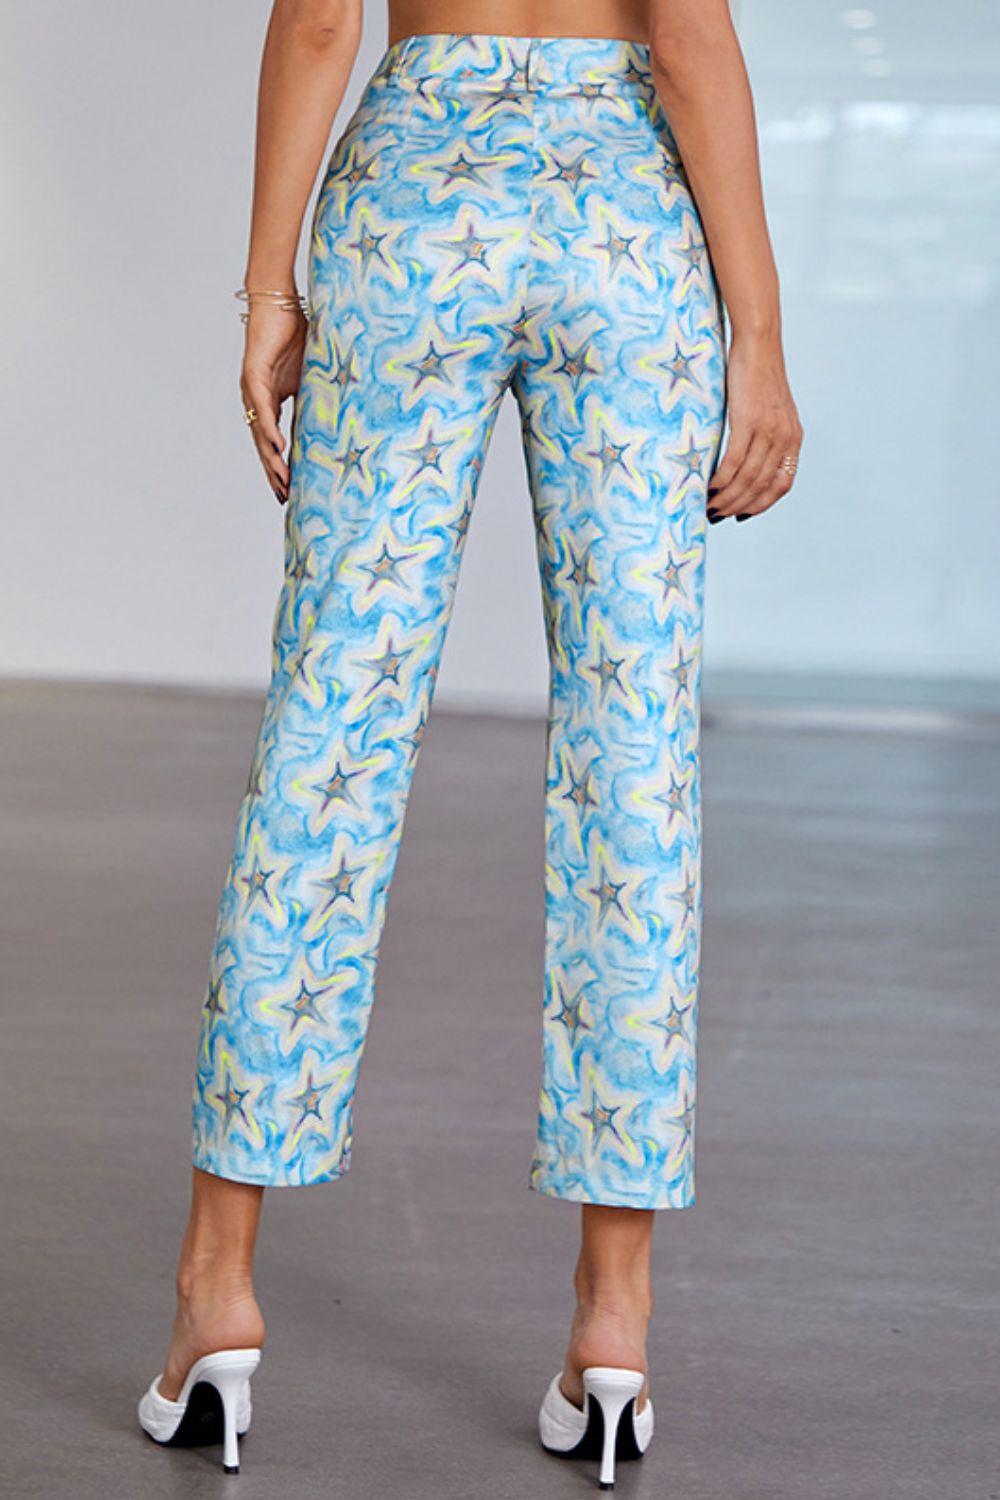 Star Print Ankle-Length Pants with Pockets - Rico Goods by Rico Suarez